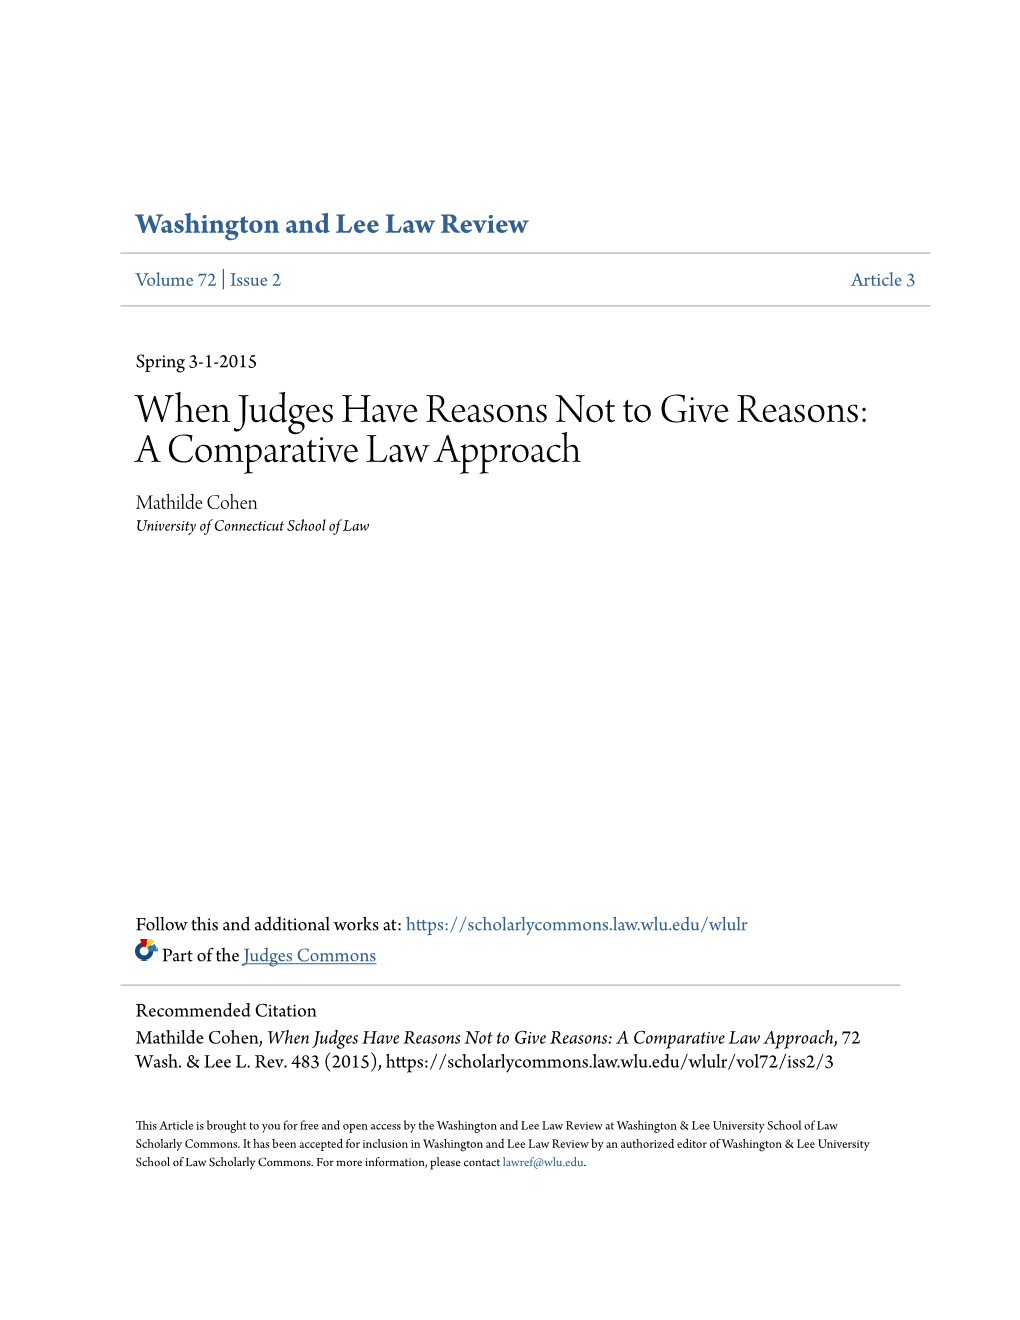 When Judges Have Reasons Not to Give Reasons: a Comparative Law Approach Mathilde Cohen University of Connecticut School of Law